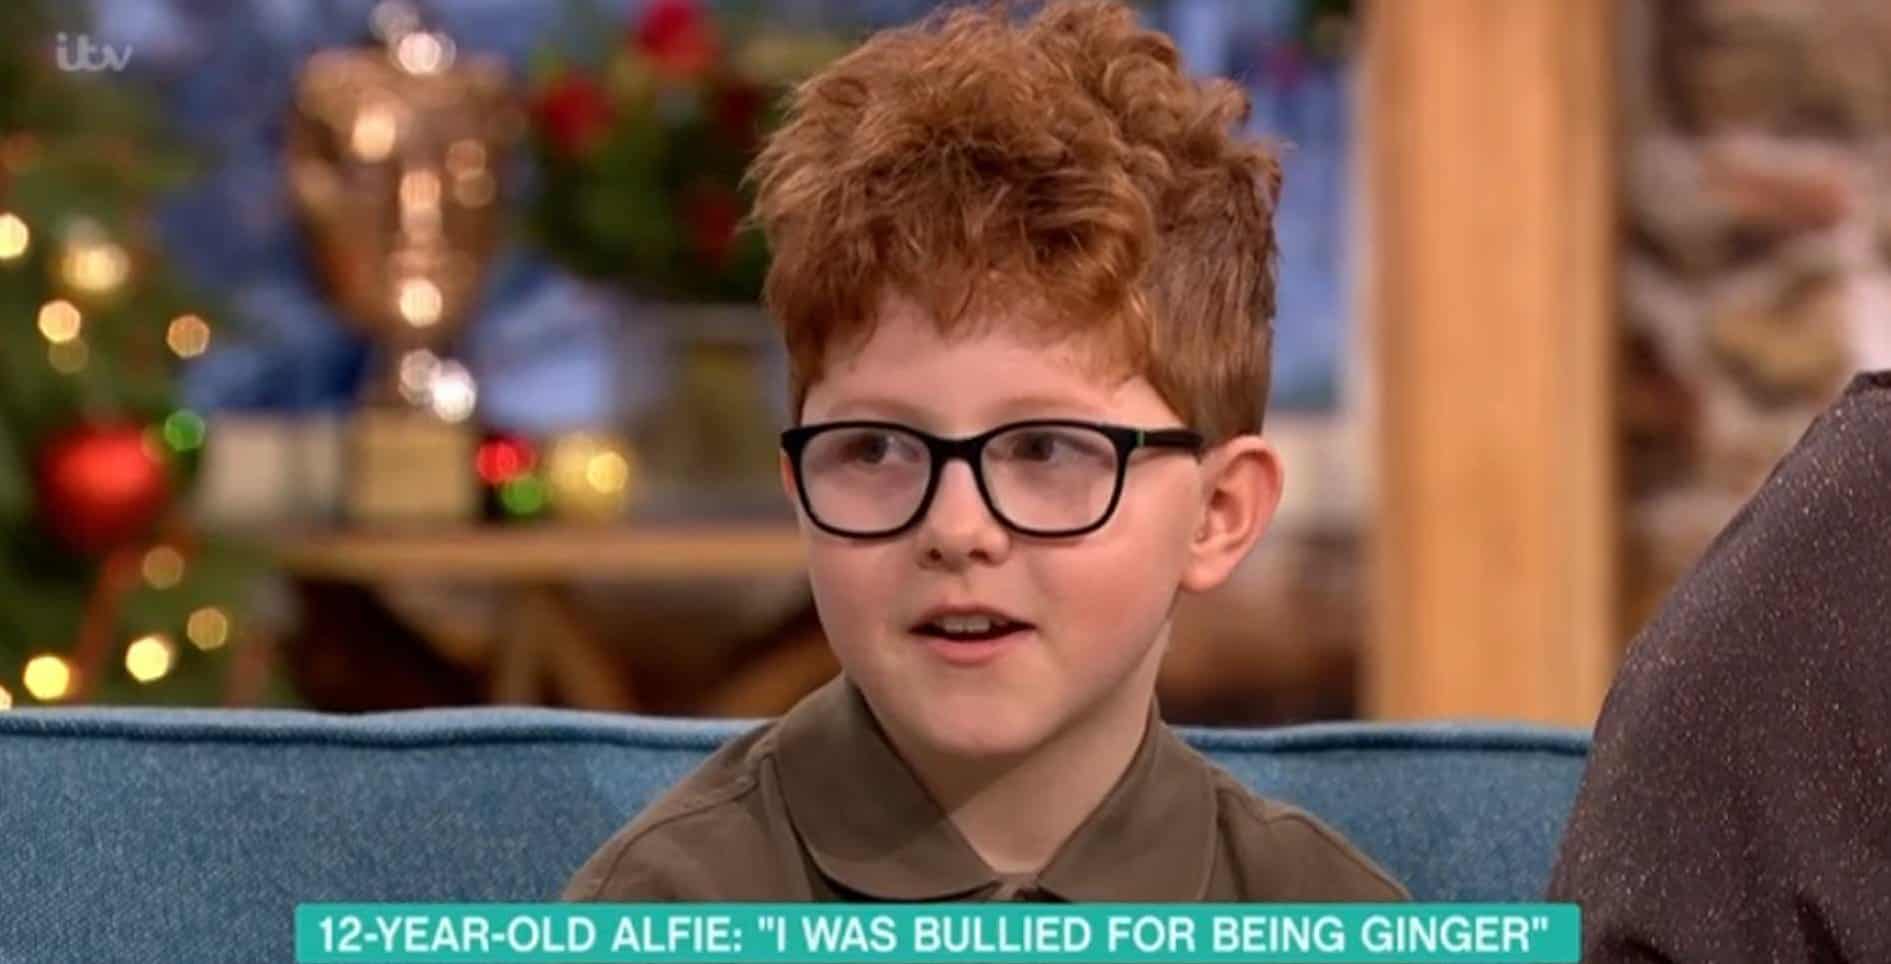 Redhead Bullying: Human rights champion says it is ‘the last socially acceptable form of bullying’